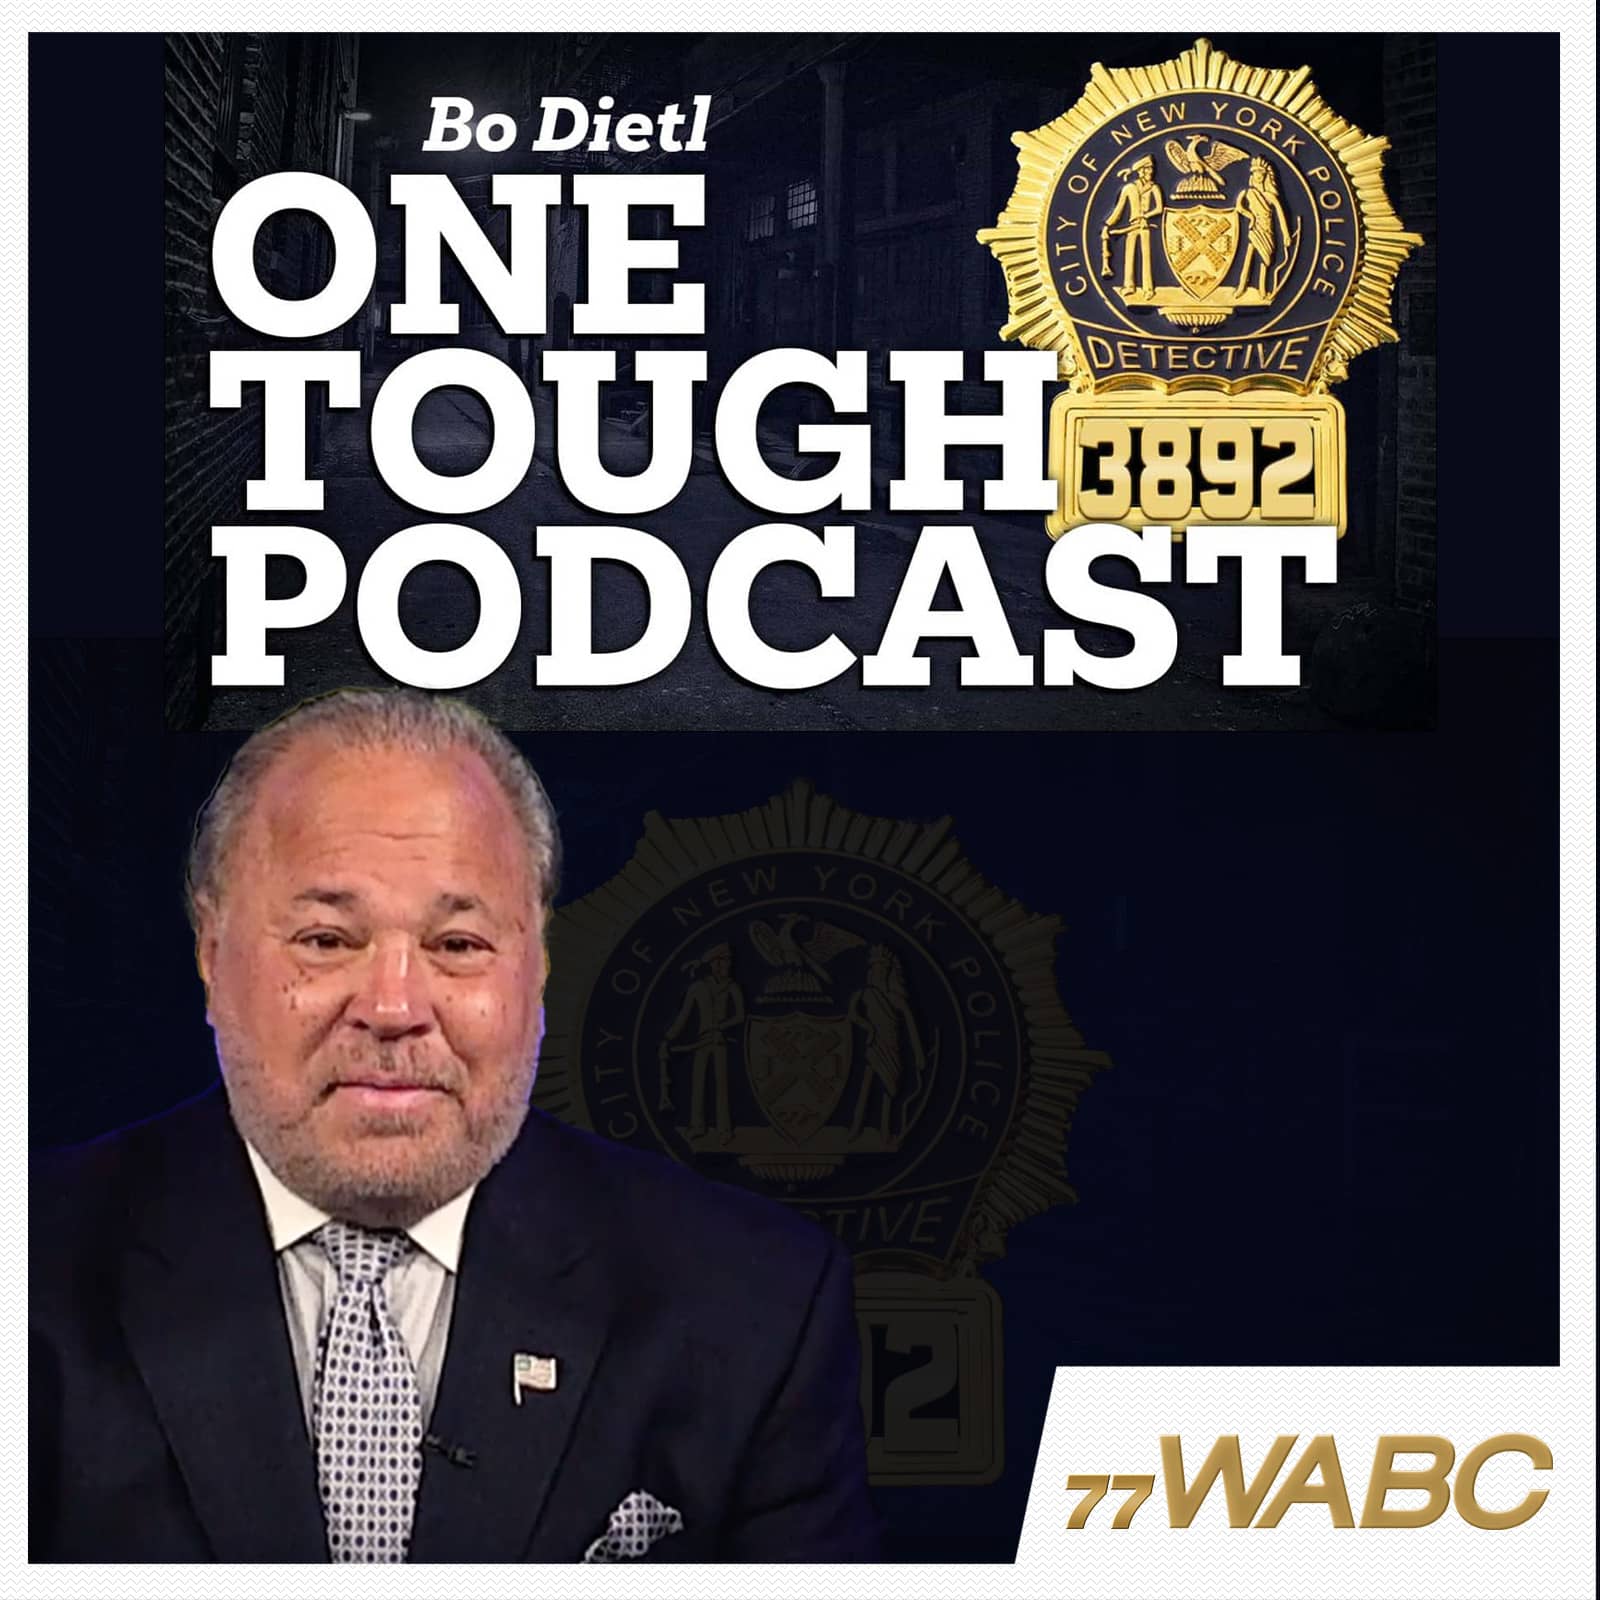 One Tough Podcast with Bo Dietl